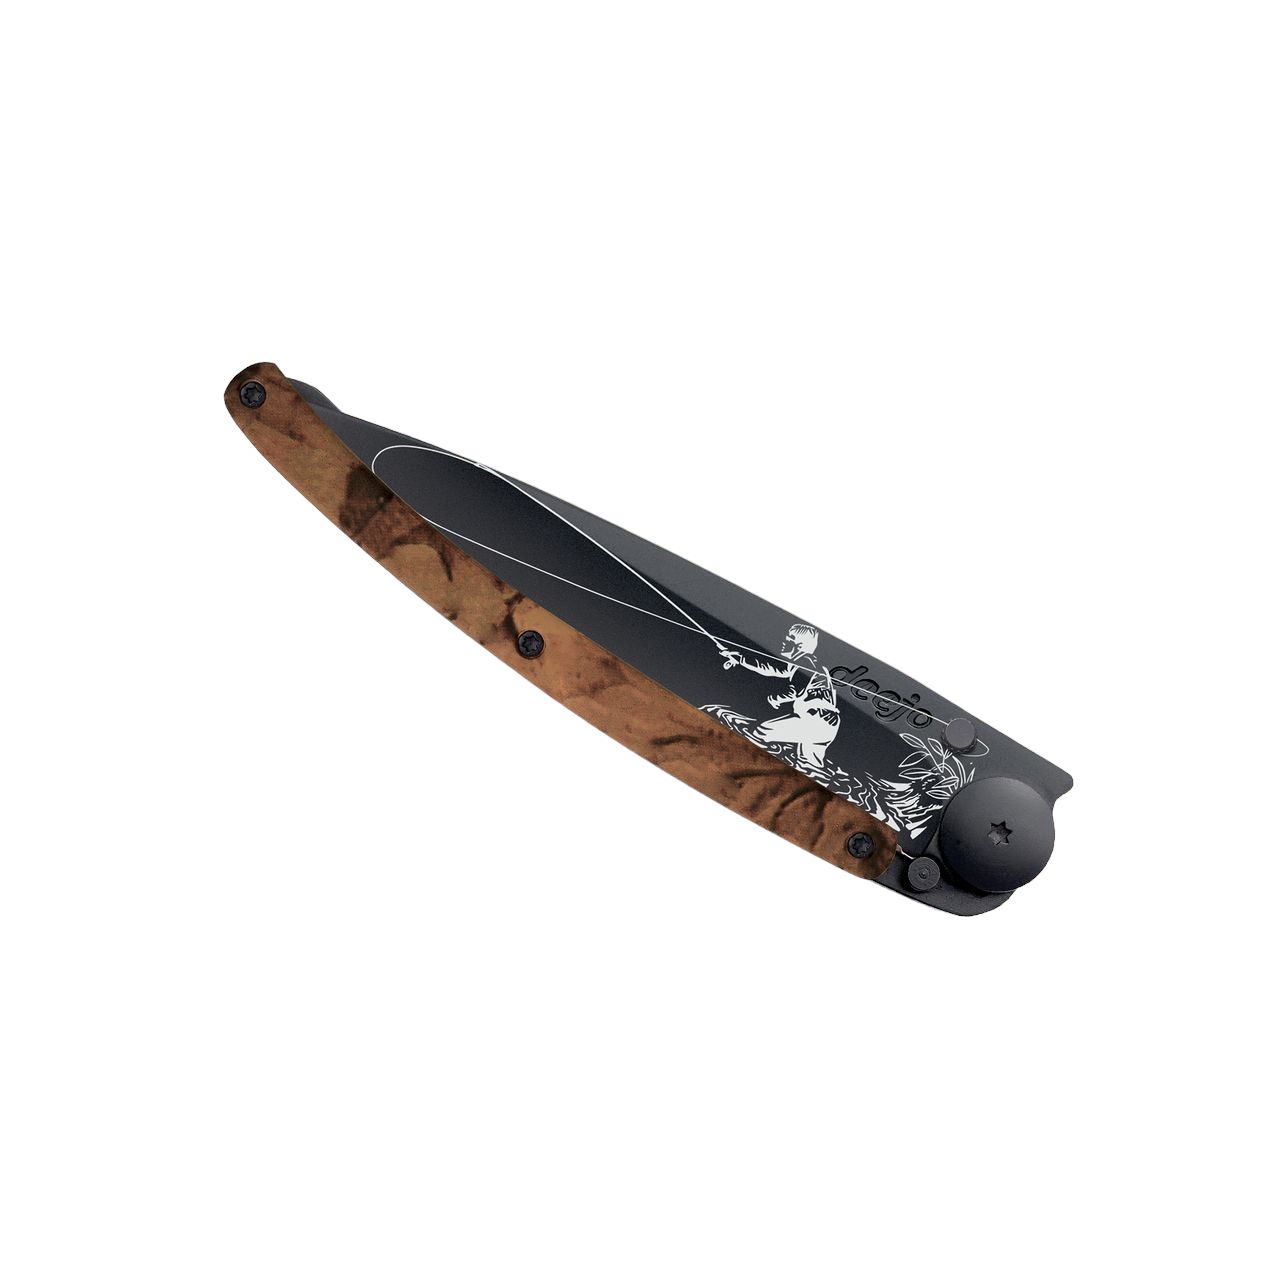 Serrated 37g Brown Camo, Tattoo "Fly Fishing", Pocket Knife